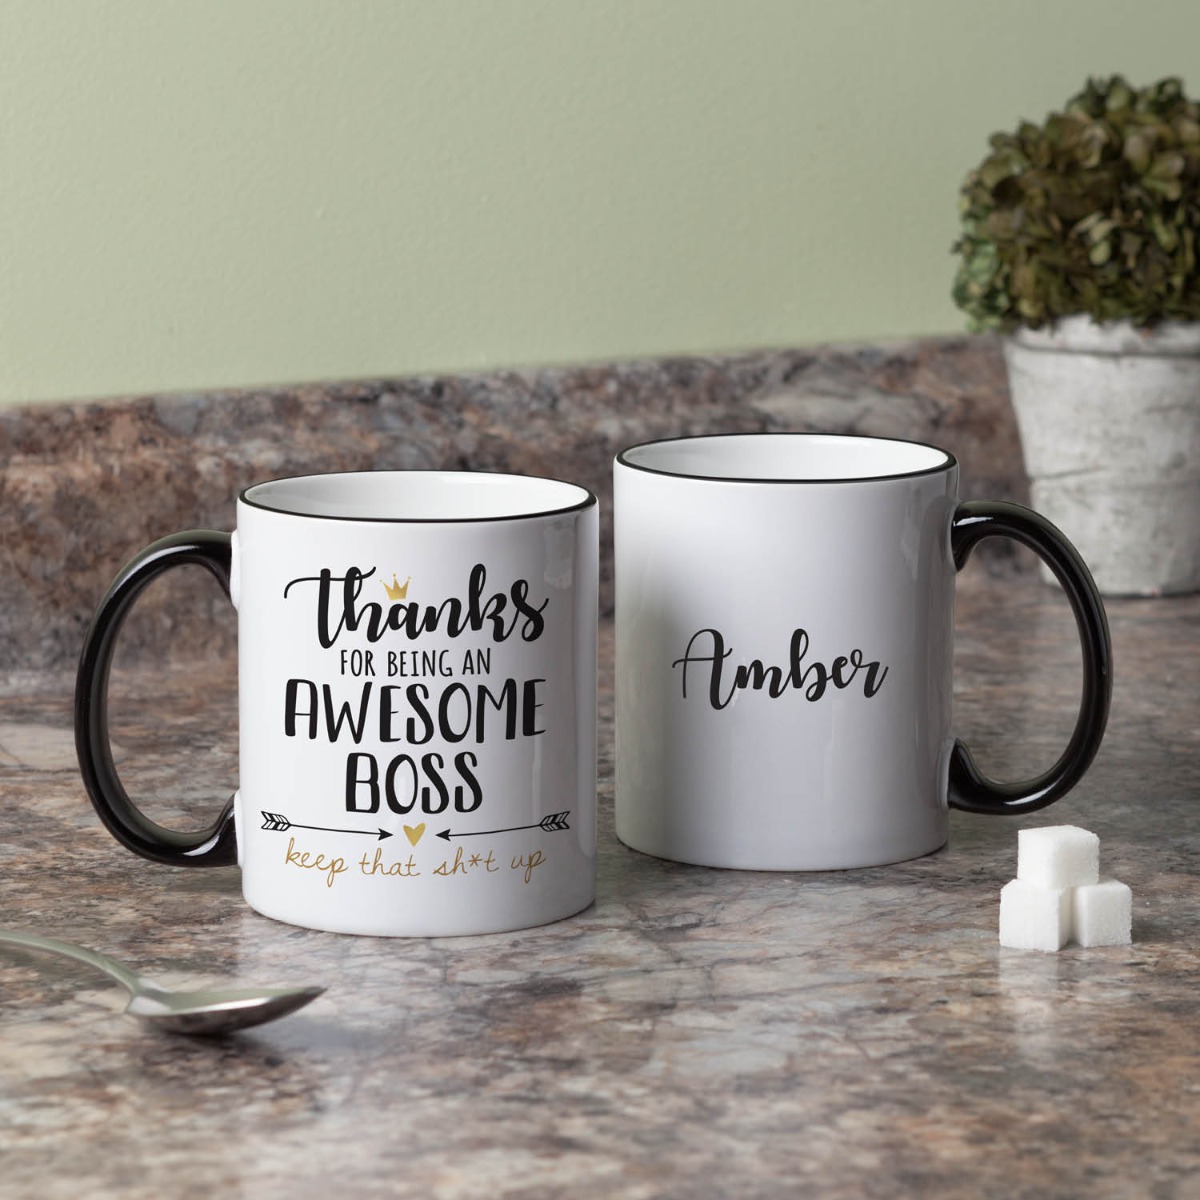 Thanks for Being An Awesome Boss Personalized Black Handle Coffee Mug - 11 oz.